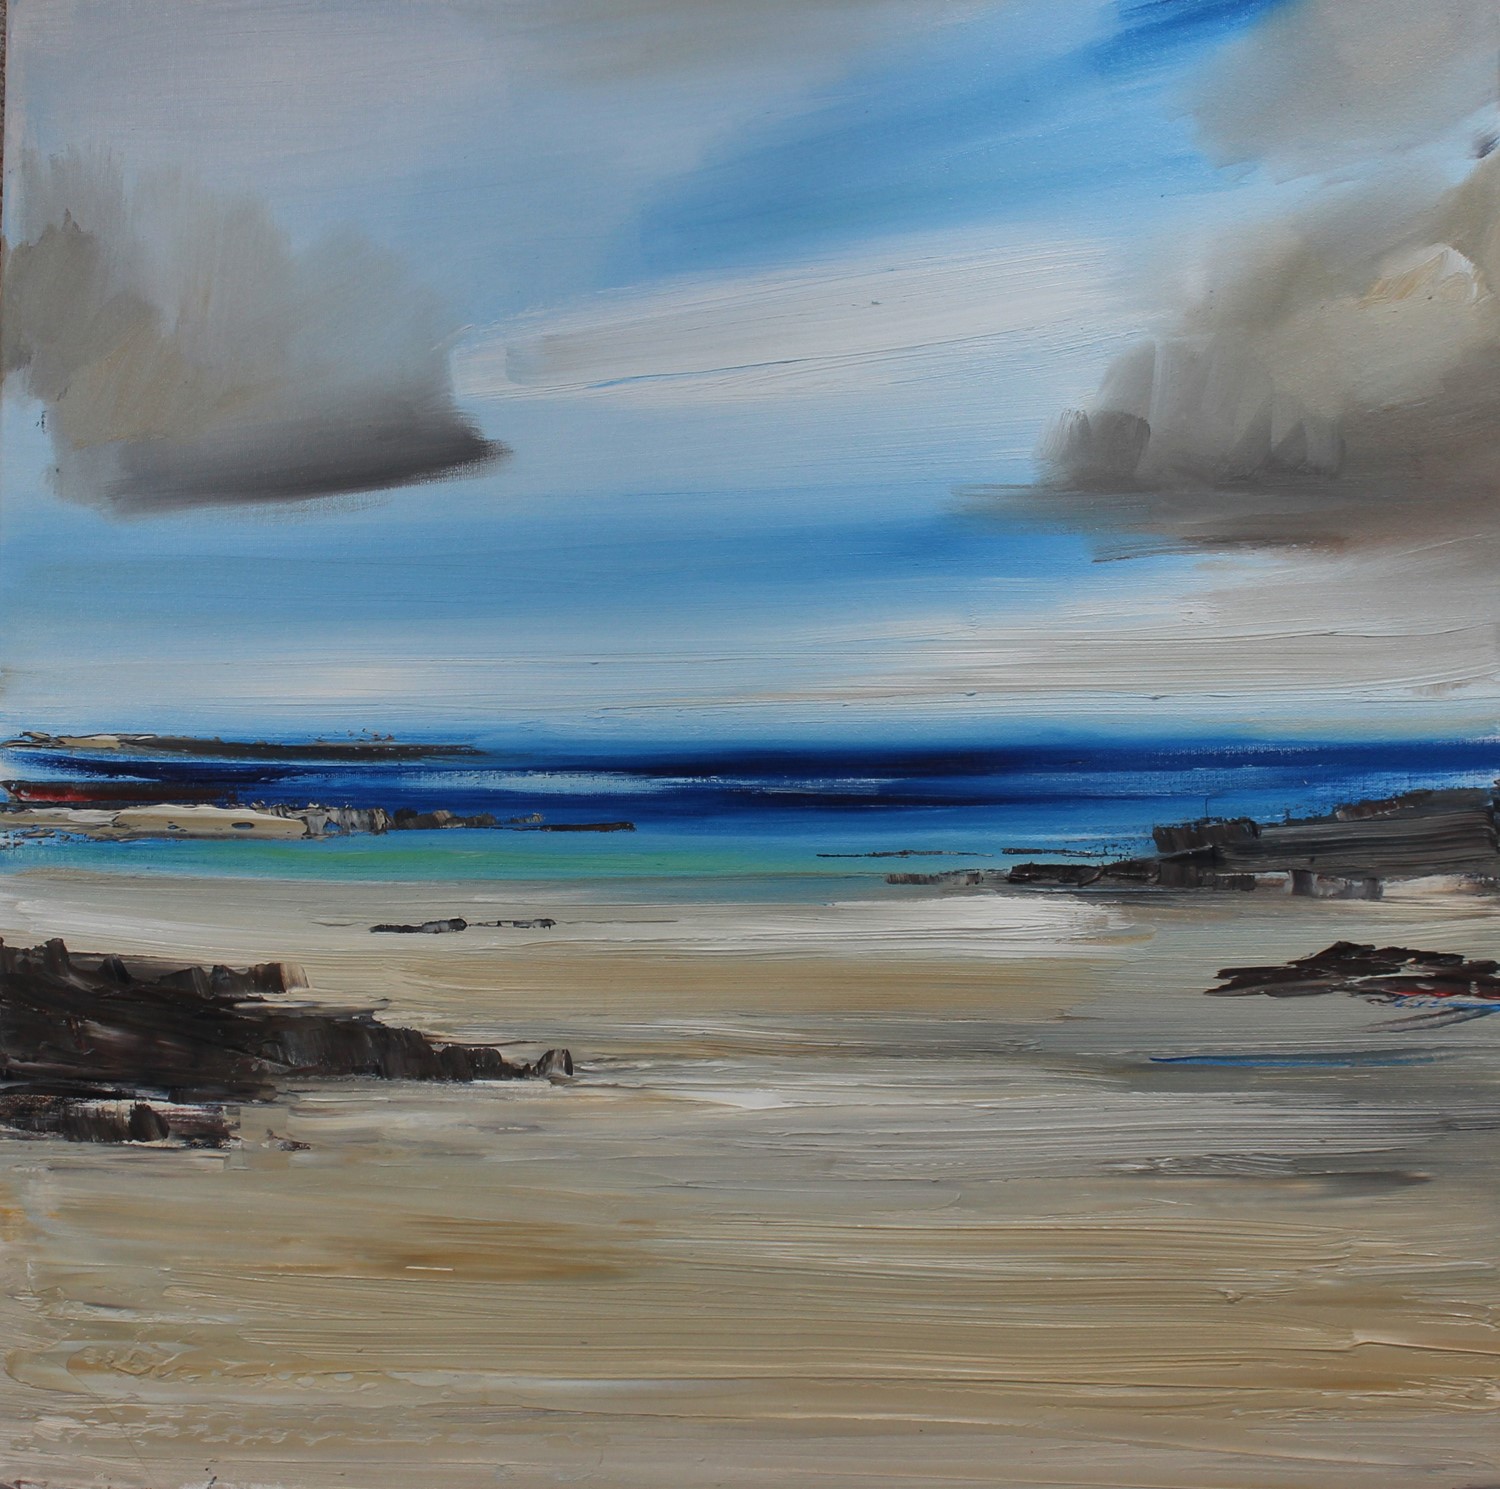 'The Silvery Sands' by artist Rosanne Barr